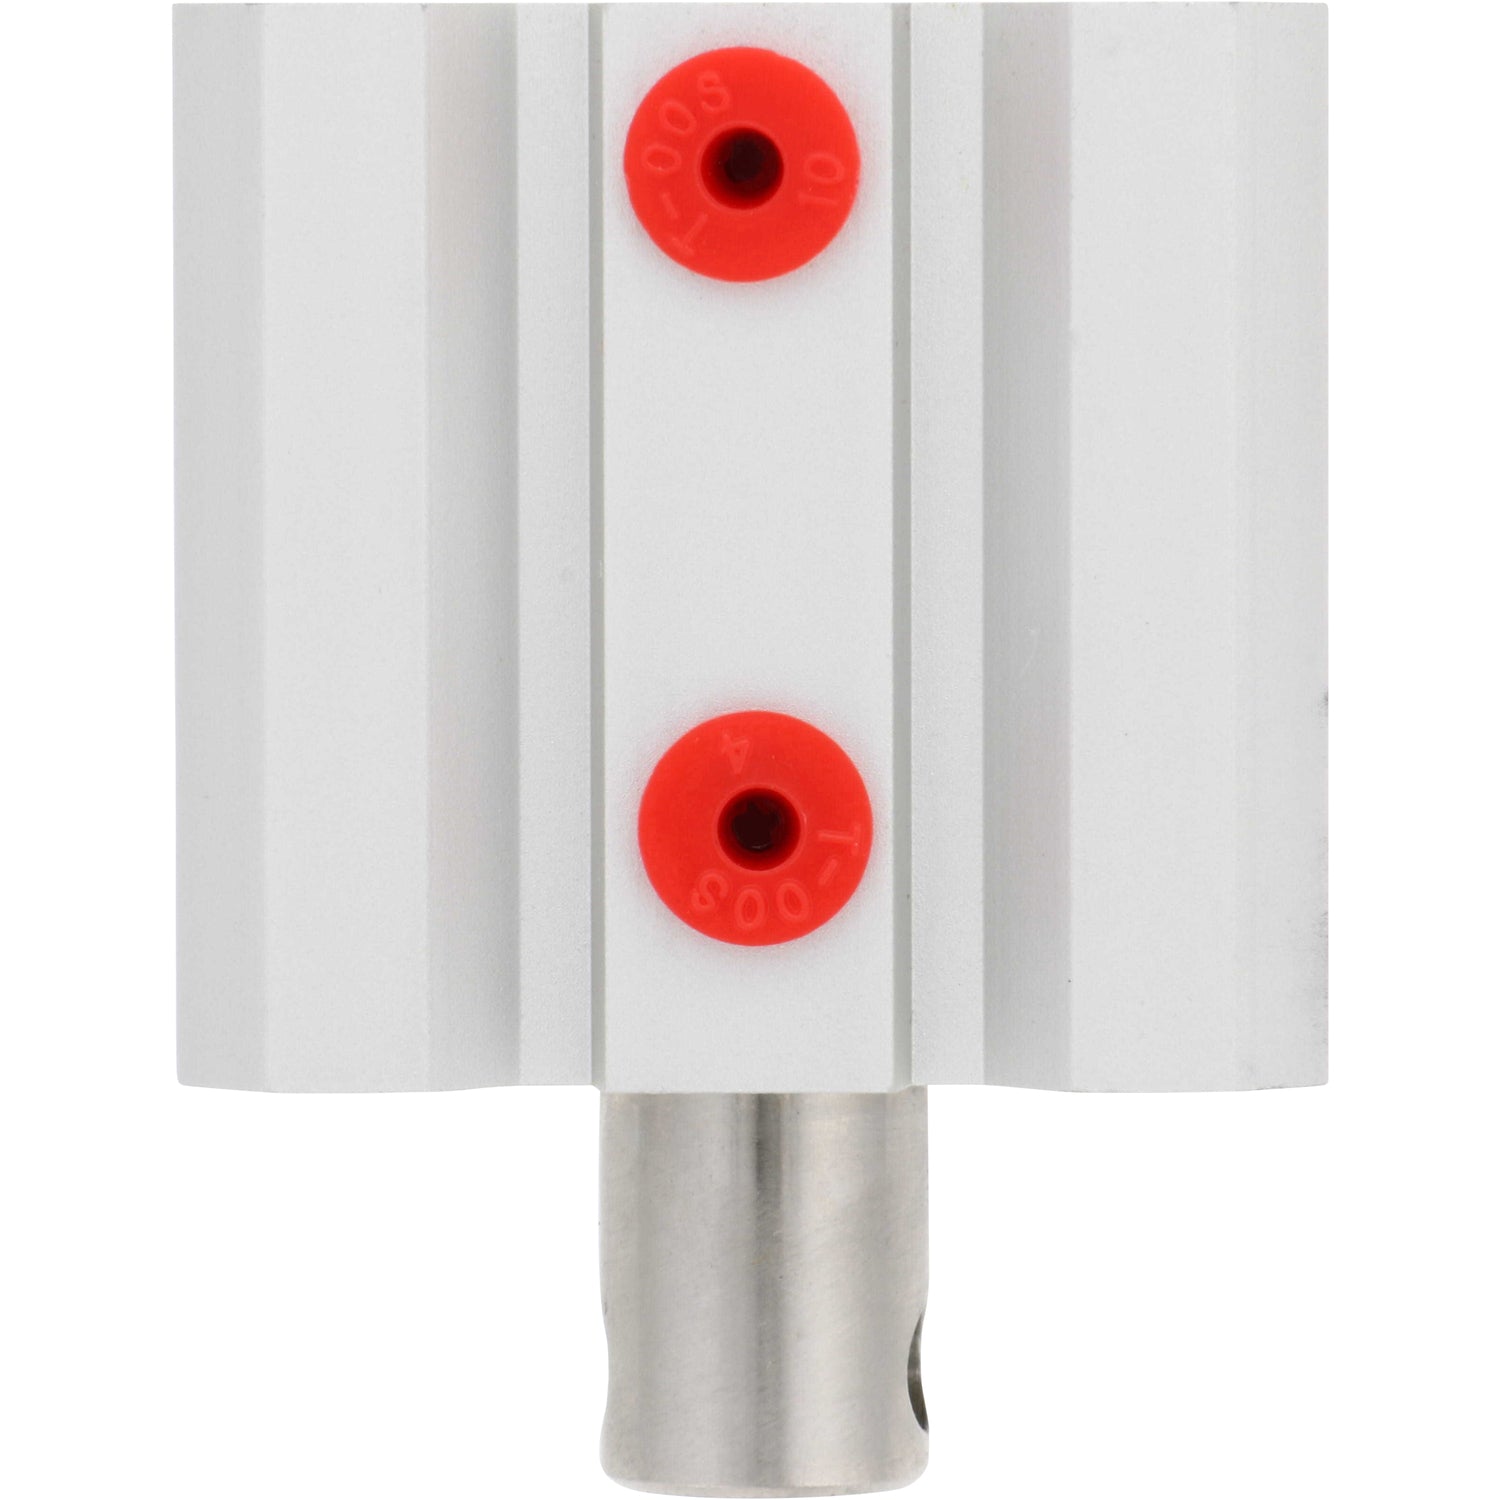 Small pneumatic cylinder with red plastic plugs pressed into threaded holes. CQ2B25-10Z-DUW02480